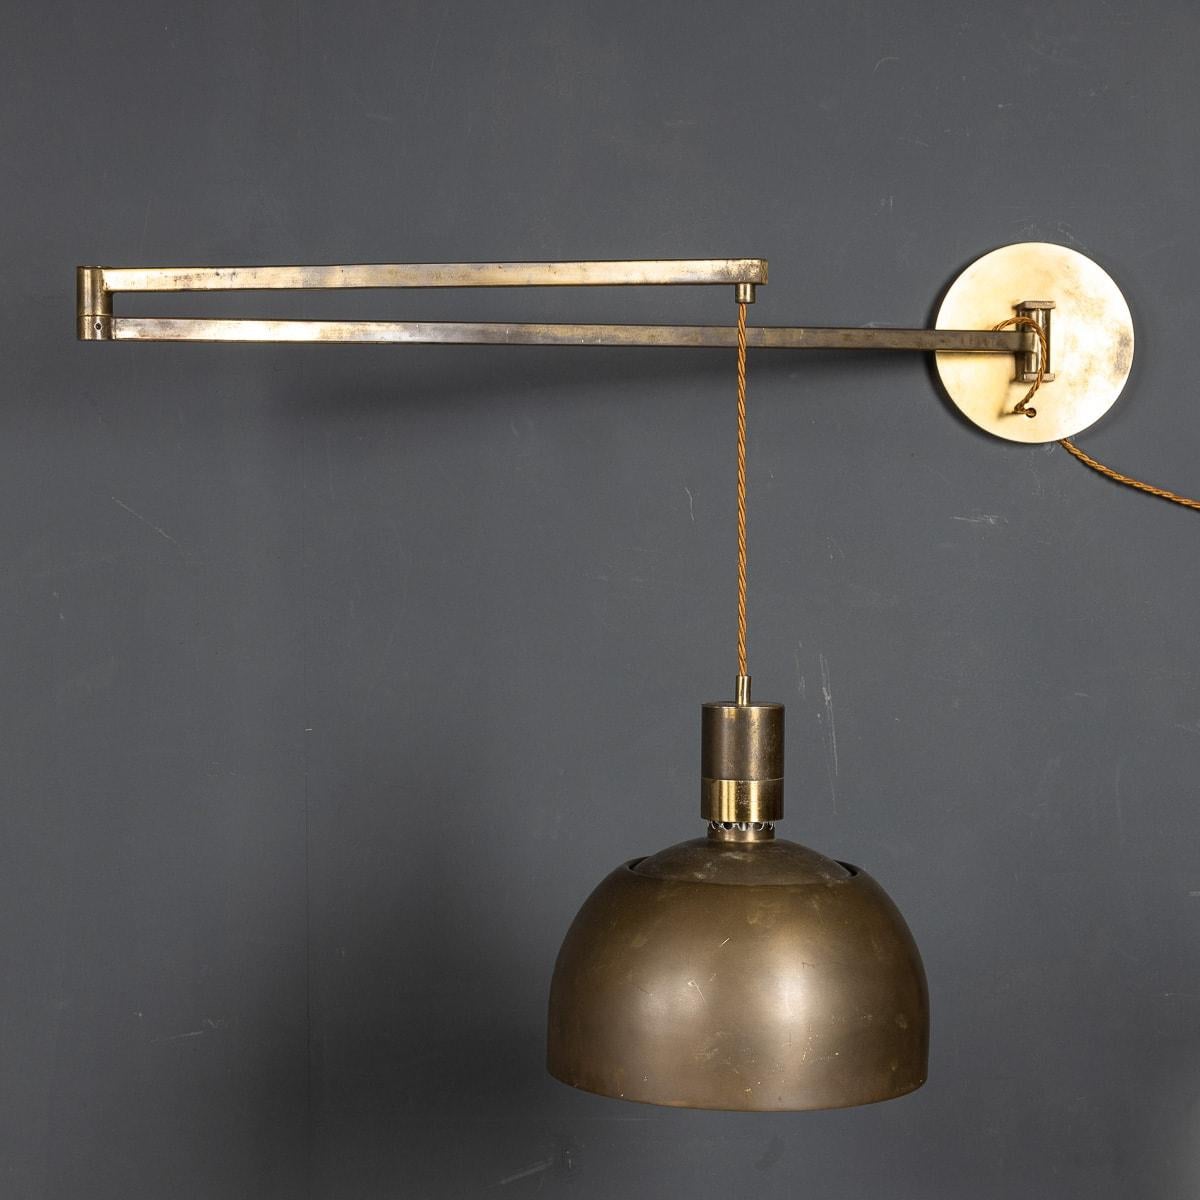 Eccentric pair of articulated wall lights made in Italy circa 1960s. These lights were designed by Franco Albini and Franca Helg and given to Sirrah Imola to manufacture. Its adjustable arm makes it possible to arrange the light partition to one's